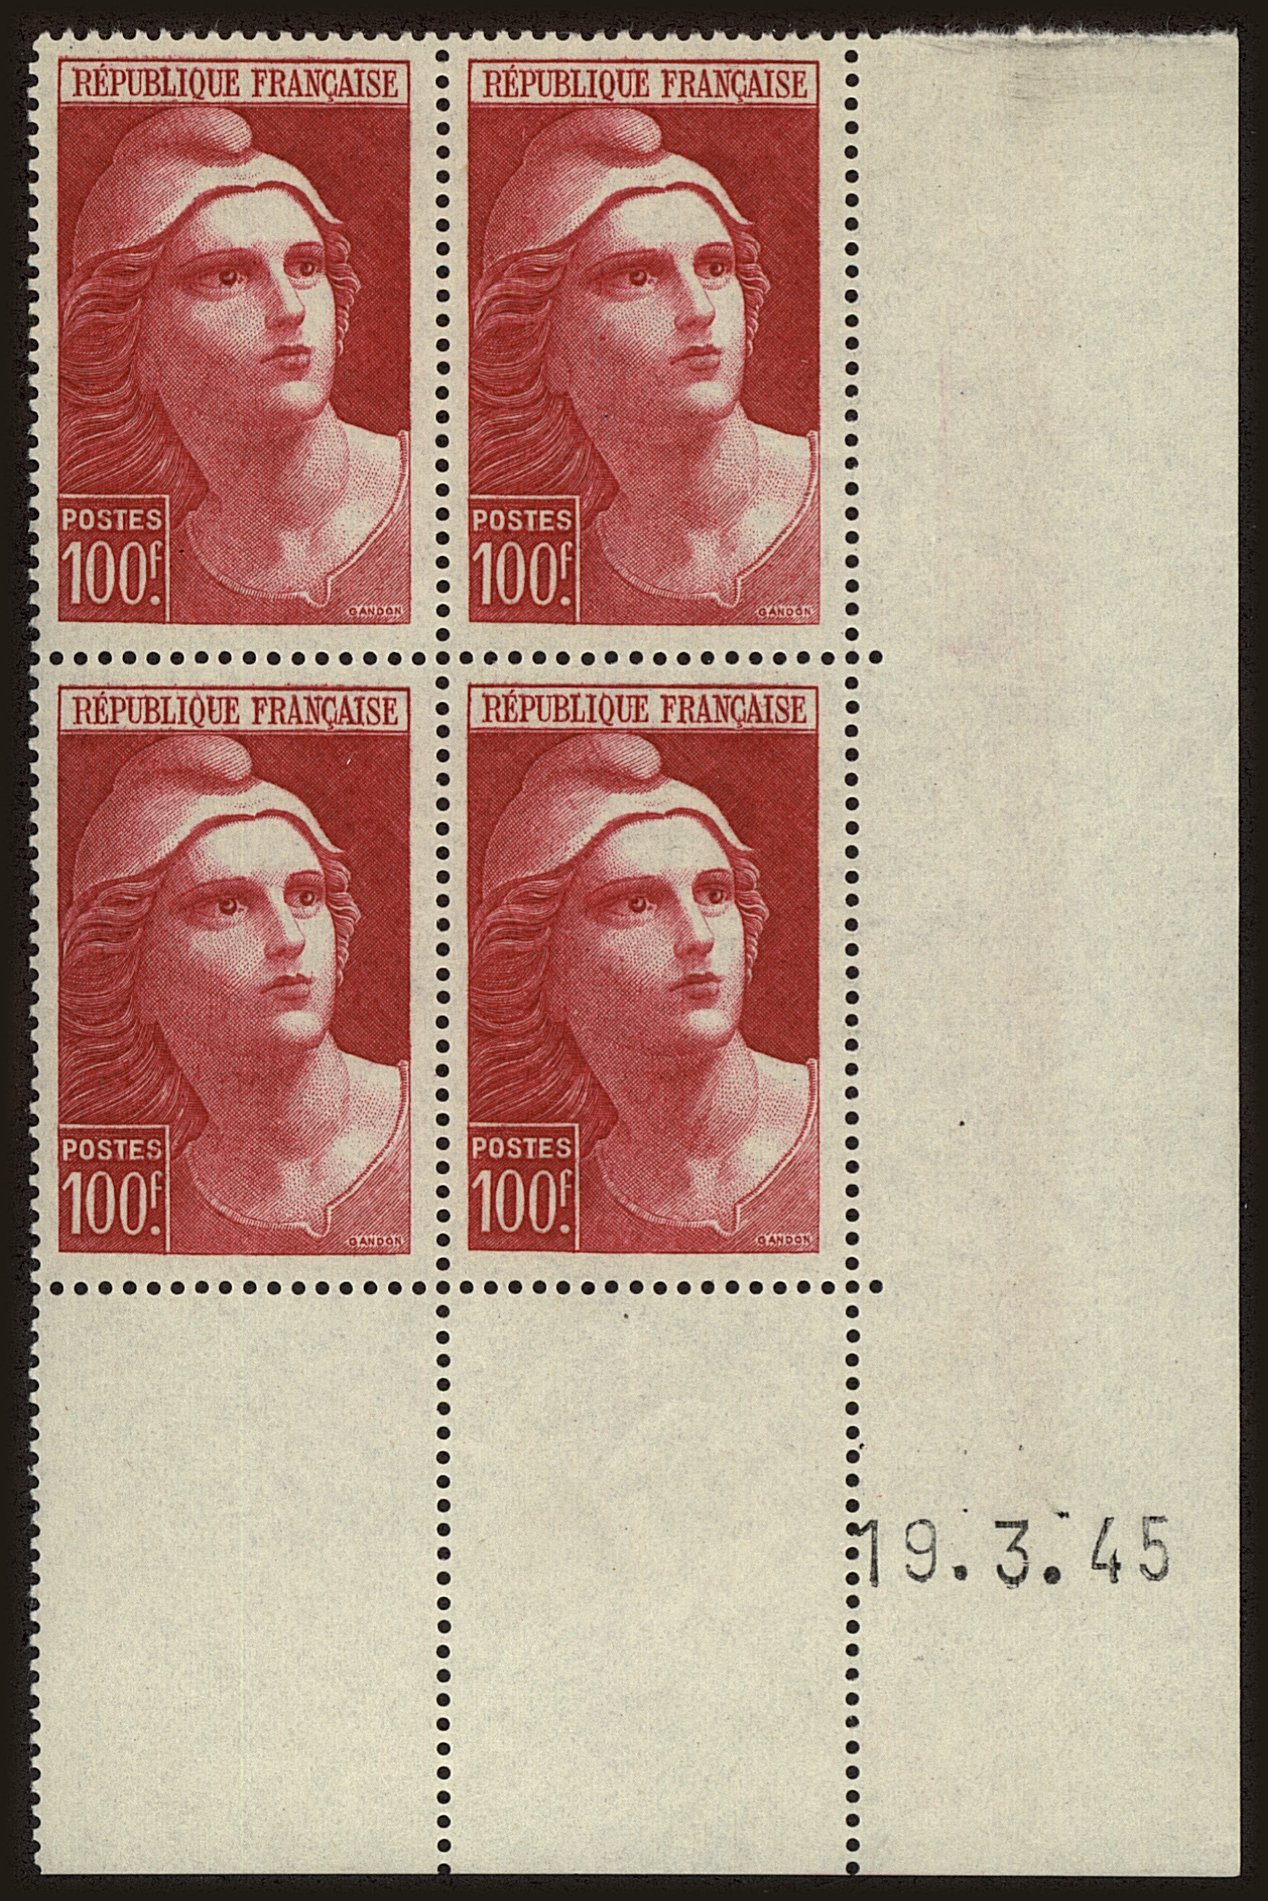 Front view of France 556 collectors stamp